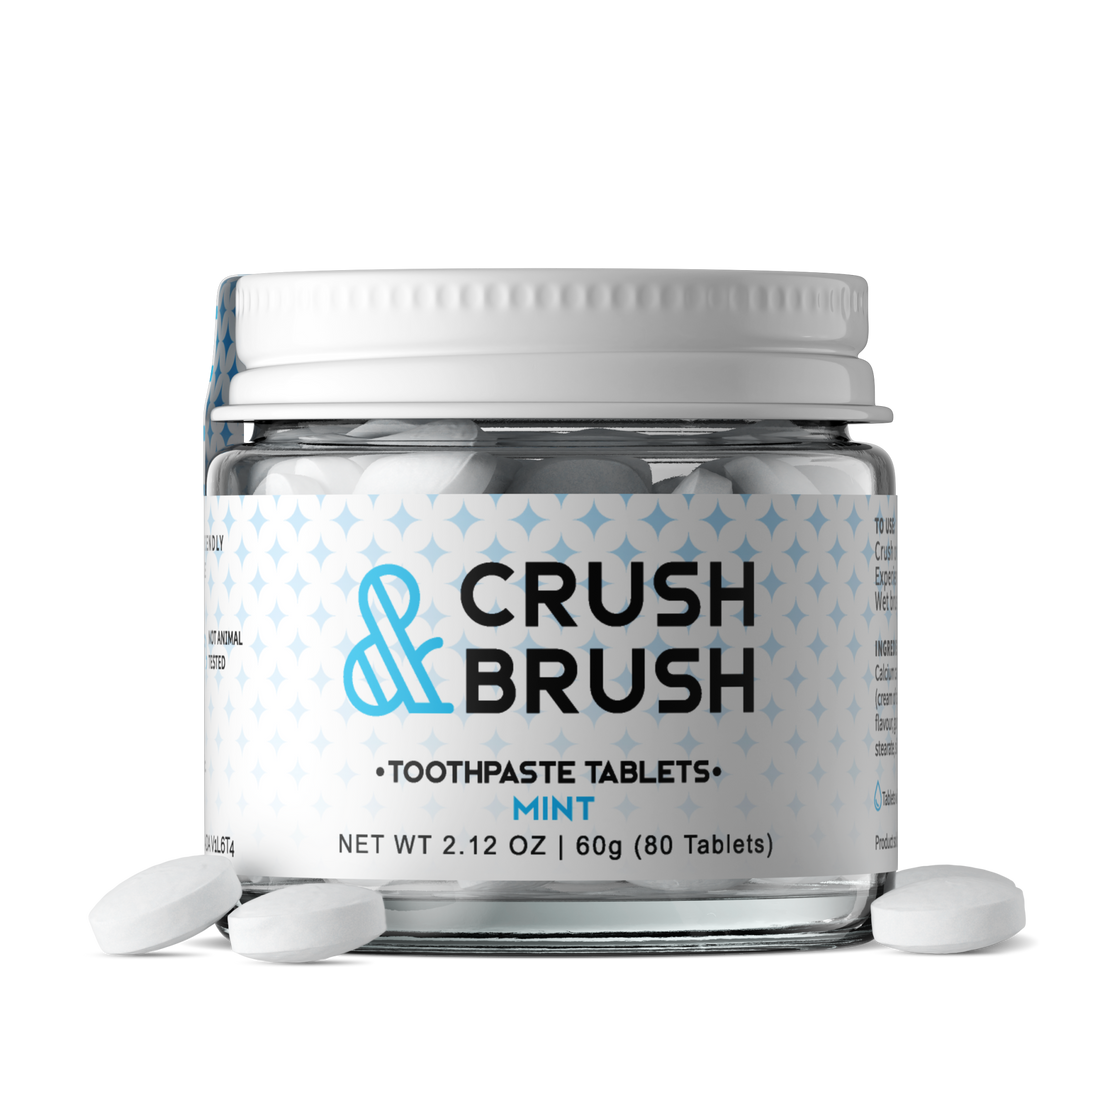 Mint Crush & Brush Toothpaste Tablets